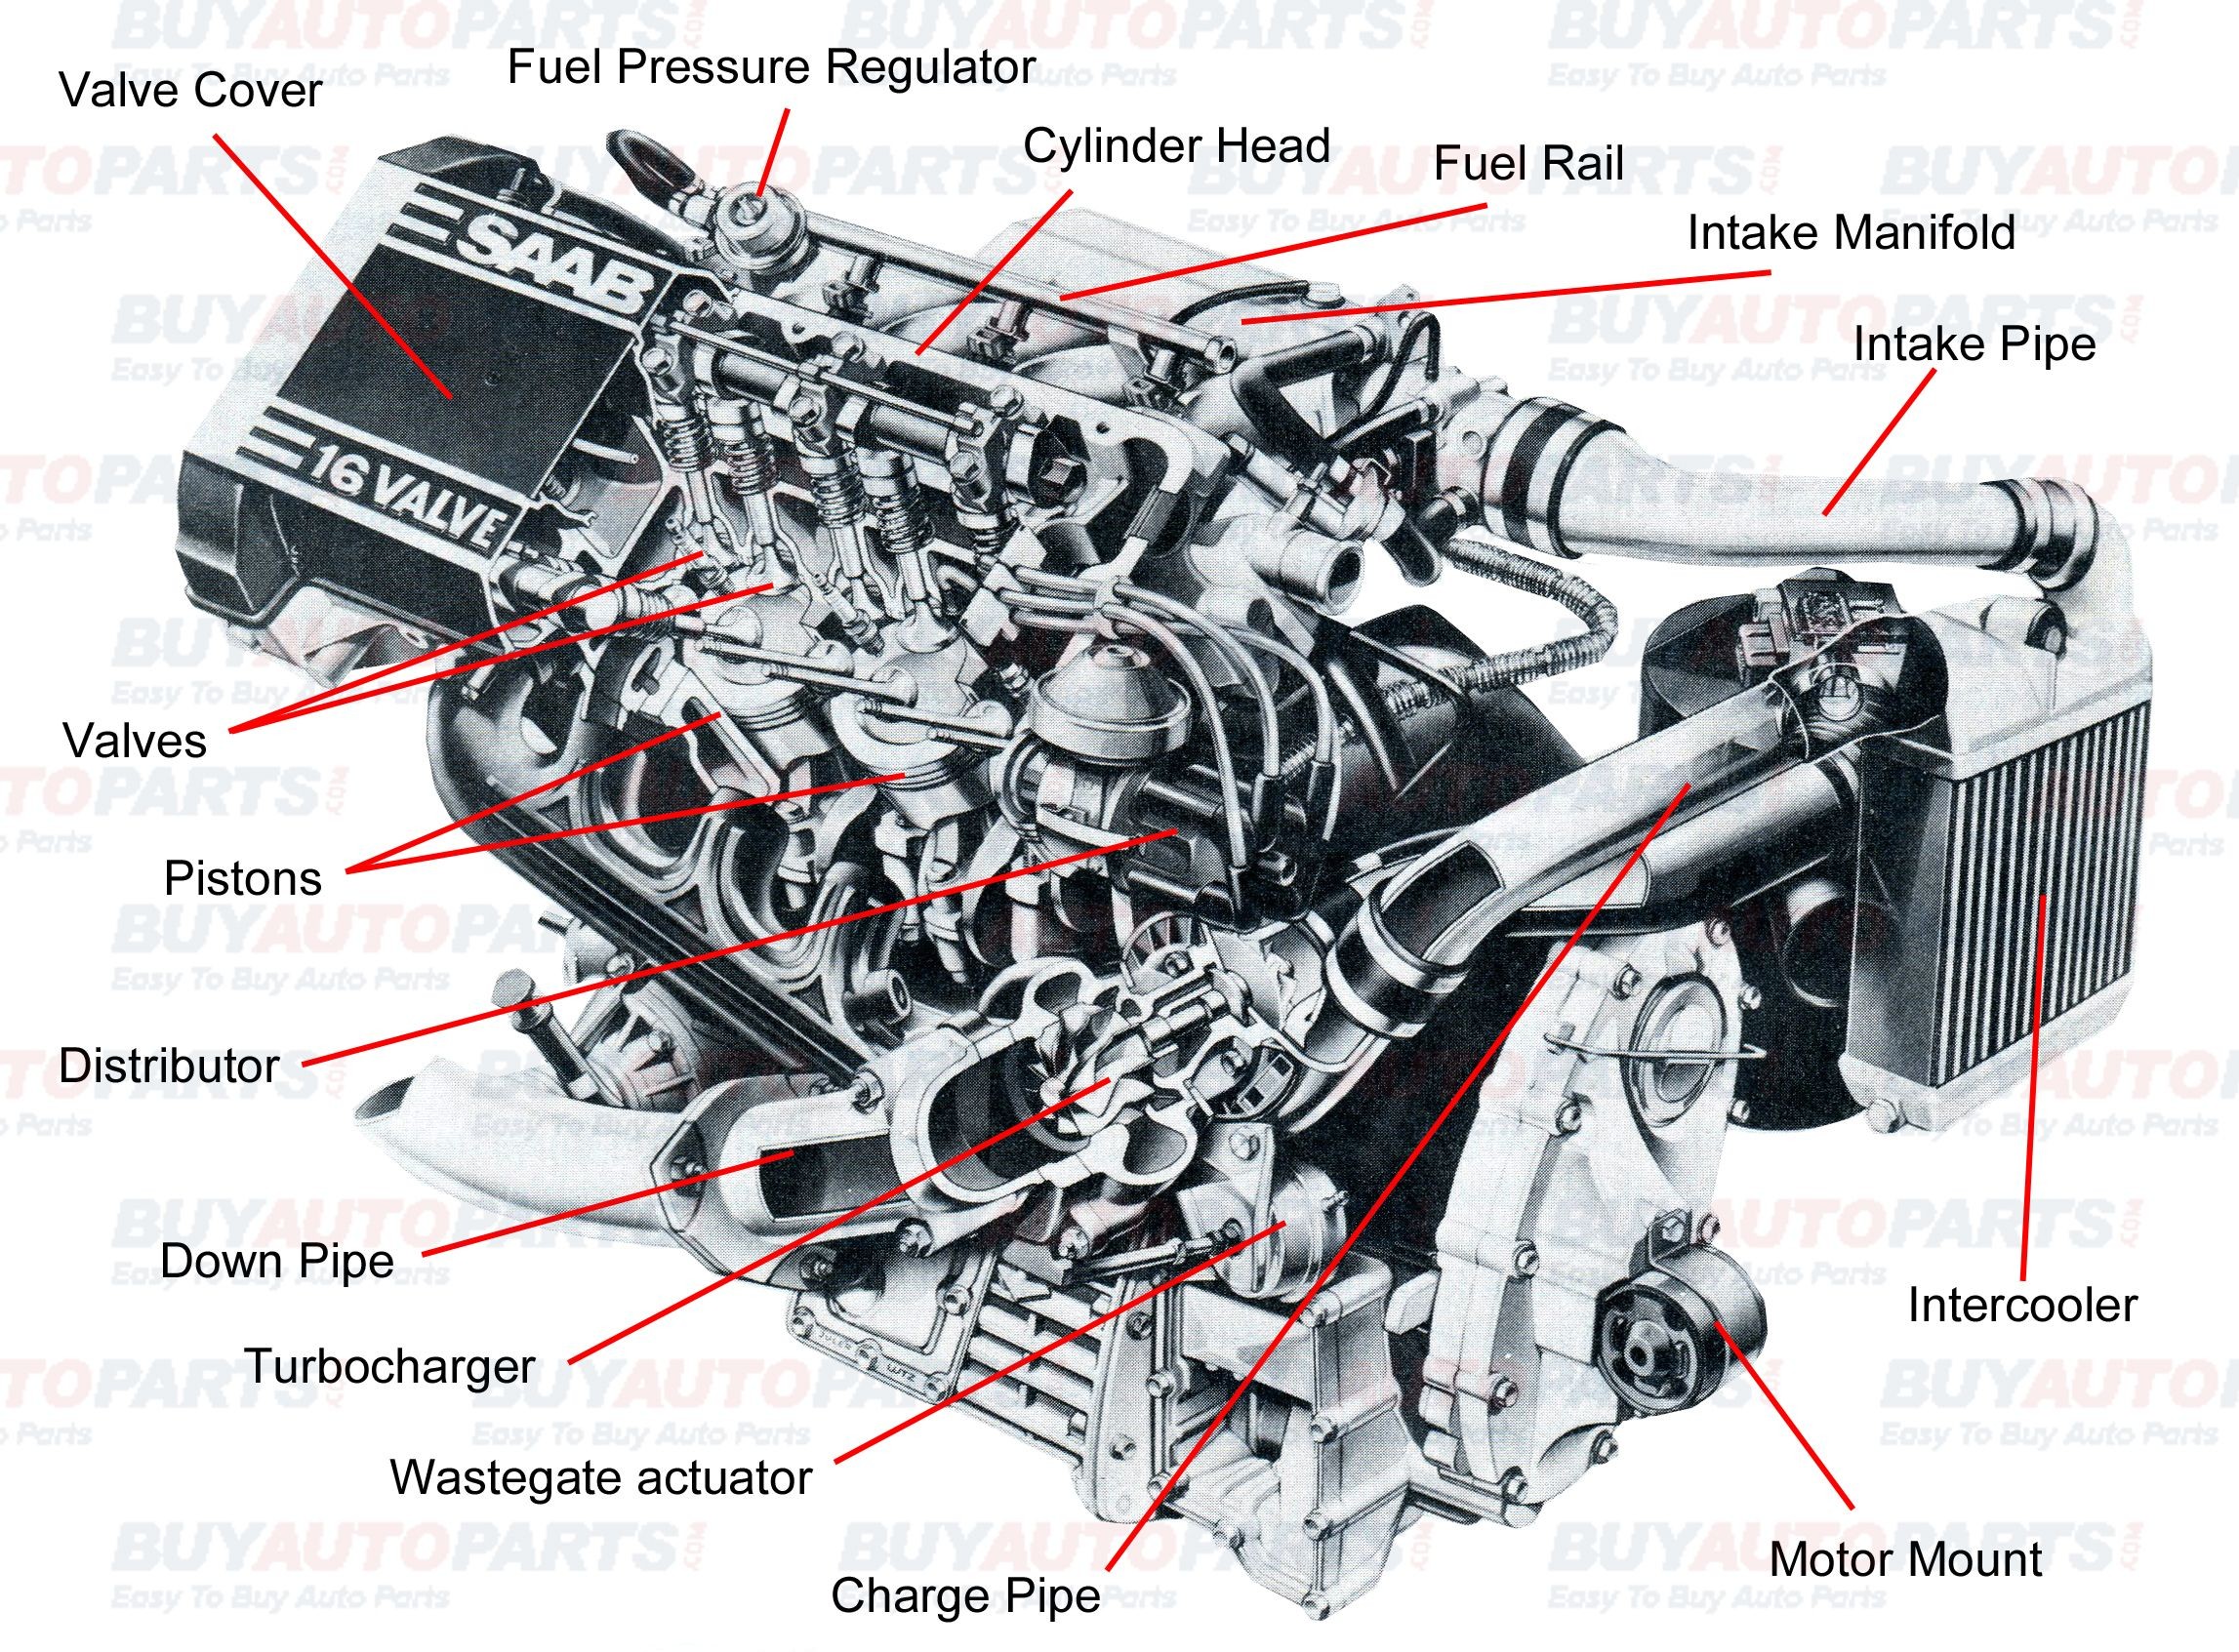 Car Engine Diagram for Driving Test Car Engine Parts Names 03 Charts Free Diagram Images Car Of Car Engine Diagram for Driving Test